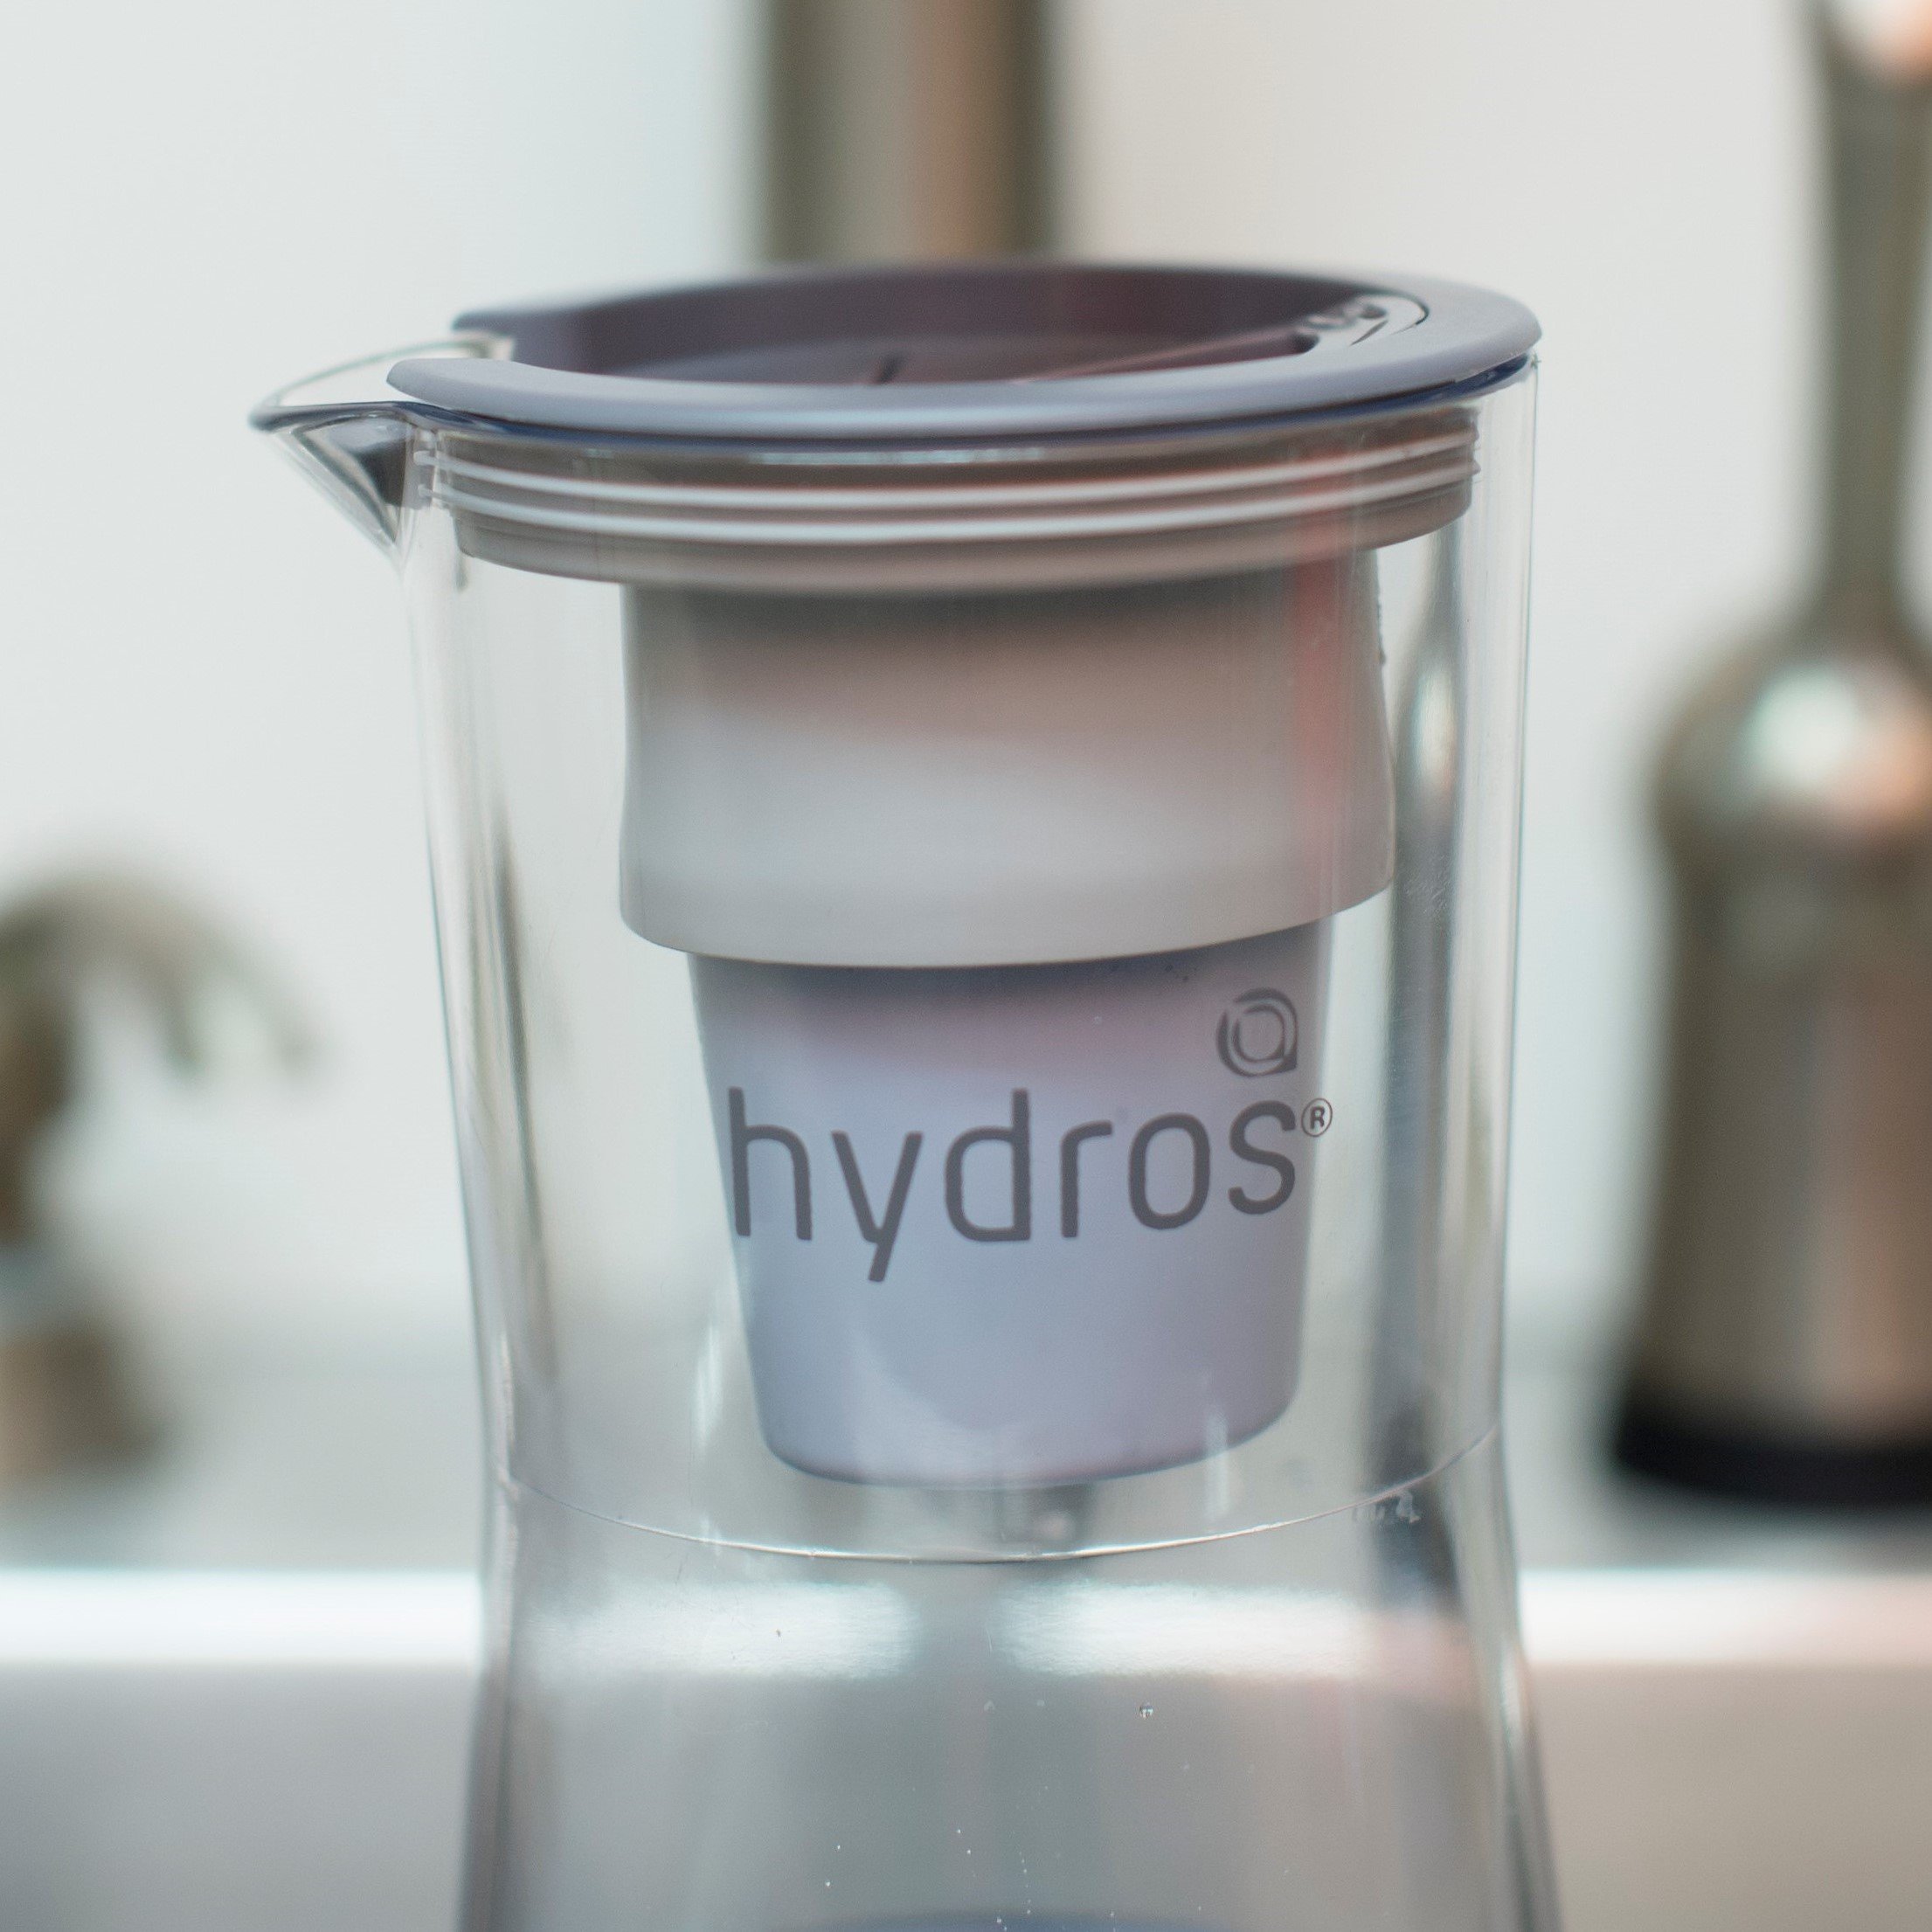 hydros-featured-image